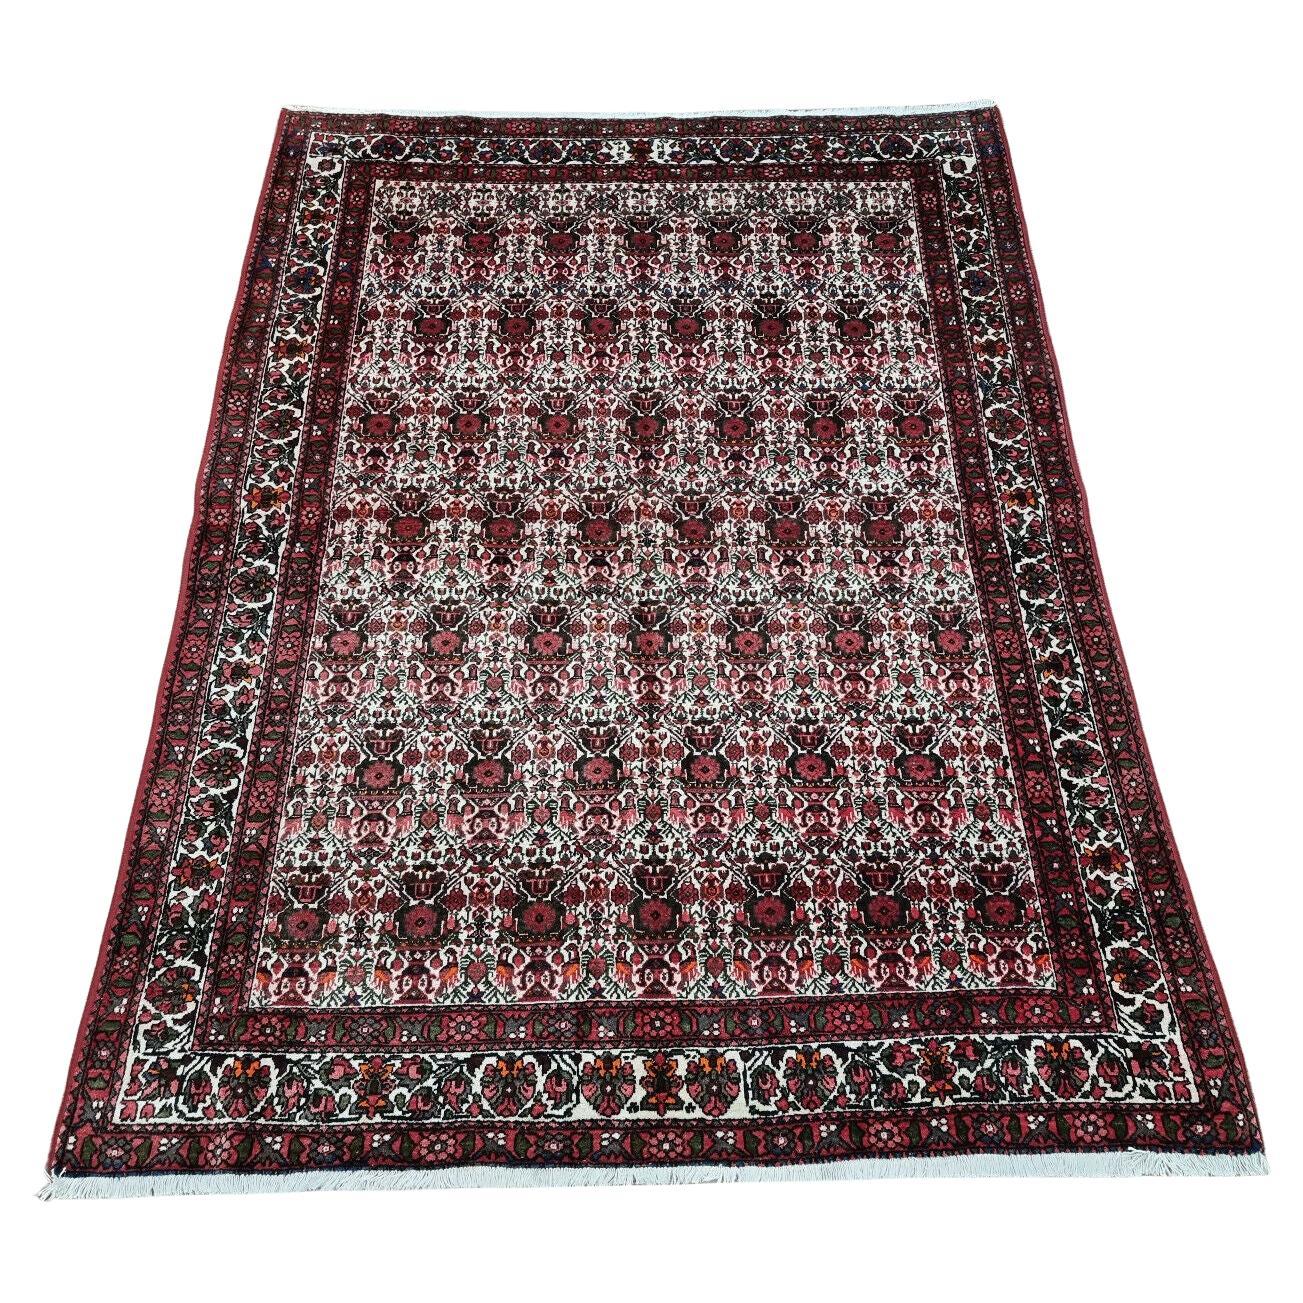 Handmade Vintage Persian Style Afshar Rug 4.9' x 6.5', 1950s - 1D97 For Sale